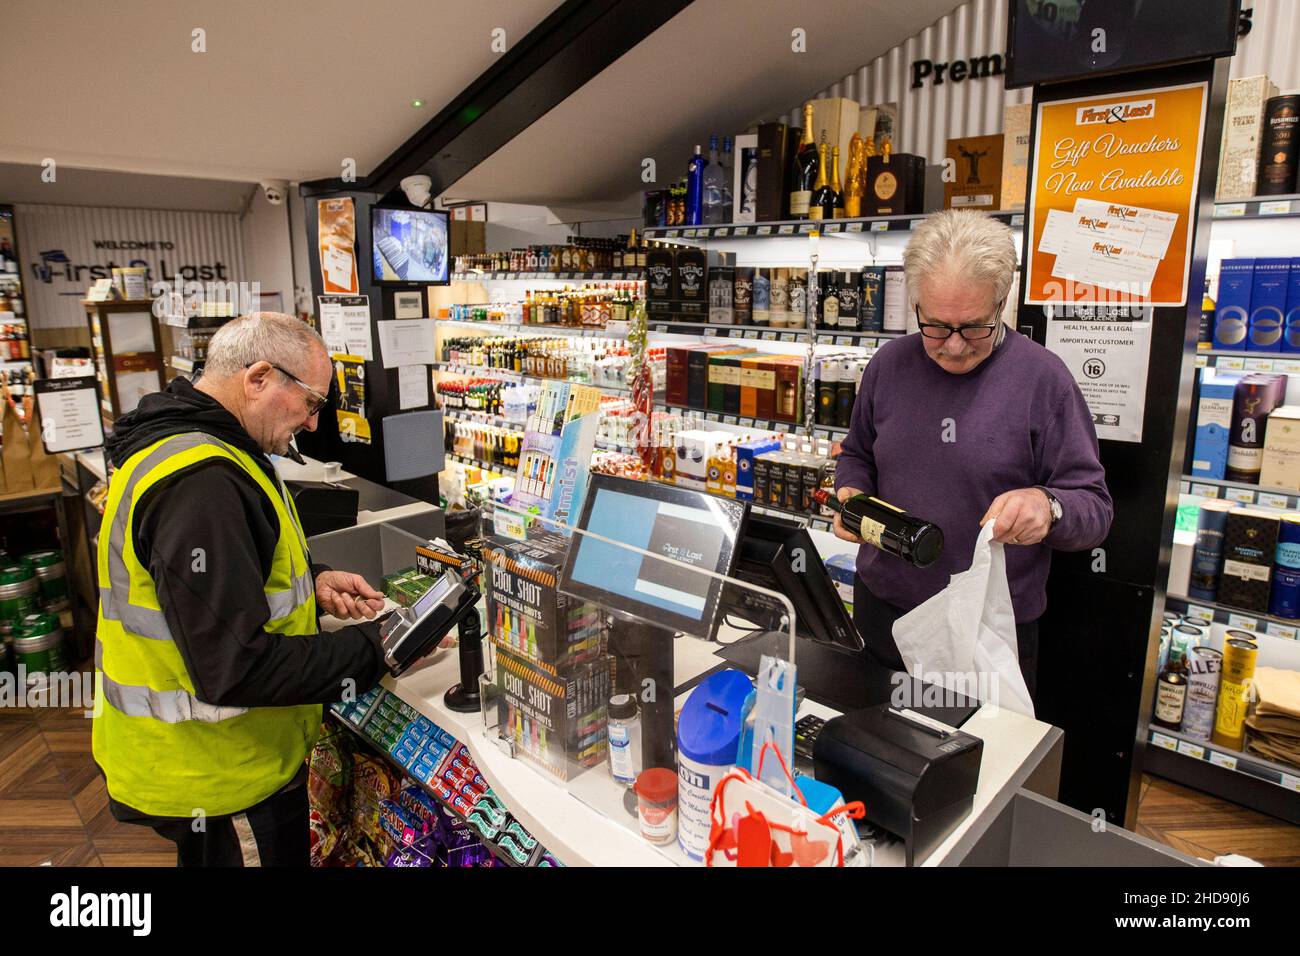 Seamus McNamee, the director of the First and Last off-licence in Jonesborough, just south of Newry in Northern Ireland serving a customer. Minimum unit alcohol pricing comes into effect in Ireland from Tuesday which could drive customers to travel from Ireland crossing the border to purchase lower priced alcohol. Picture date: Tuesday January 4 2021. Stock Photo